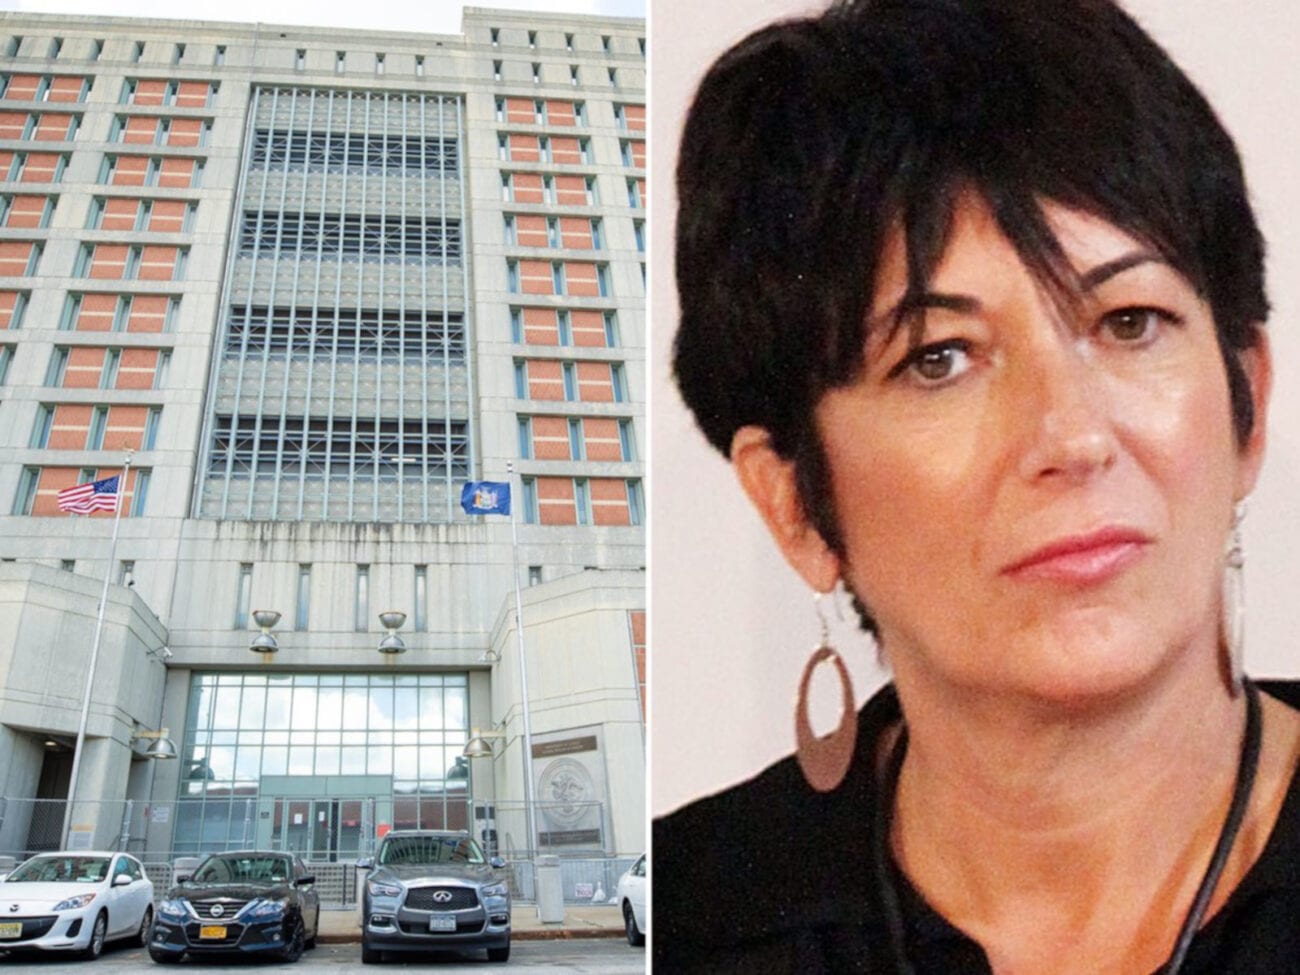 Is Ghislaine Maxwell being mistreated in jail? Learn what Maxwell and her lawyers have to say about her conditions in prison.